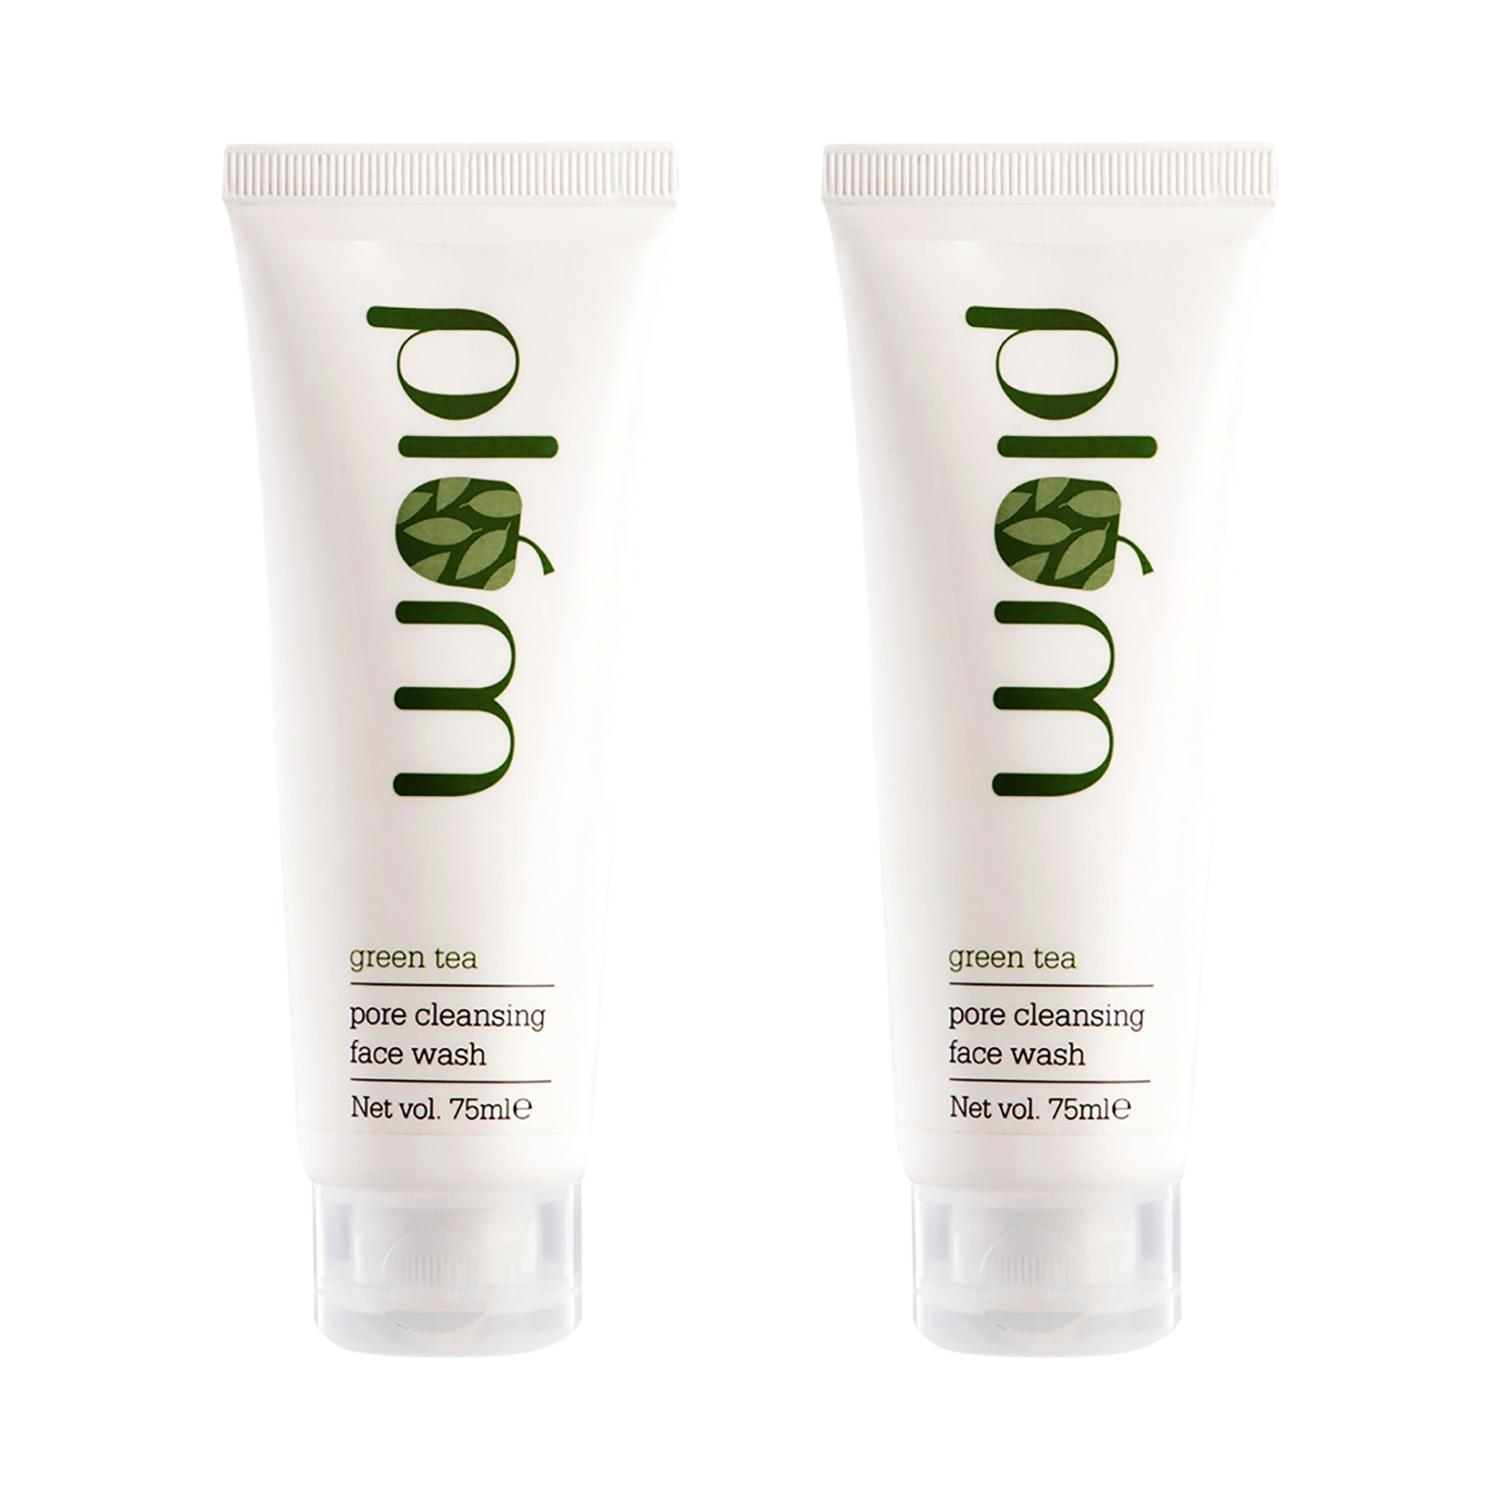 plum green tea pore cleansing face wash, oily skin, fights acne (75ml) - pack of 2 combo